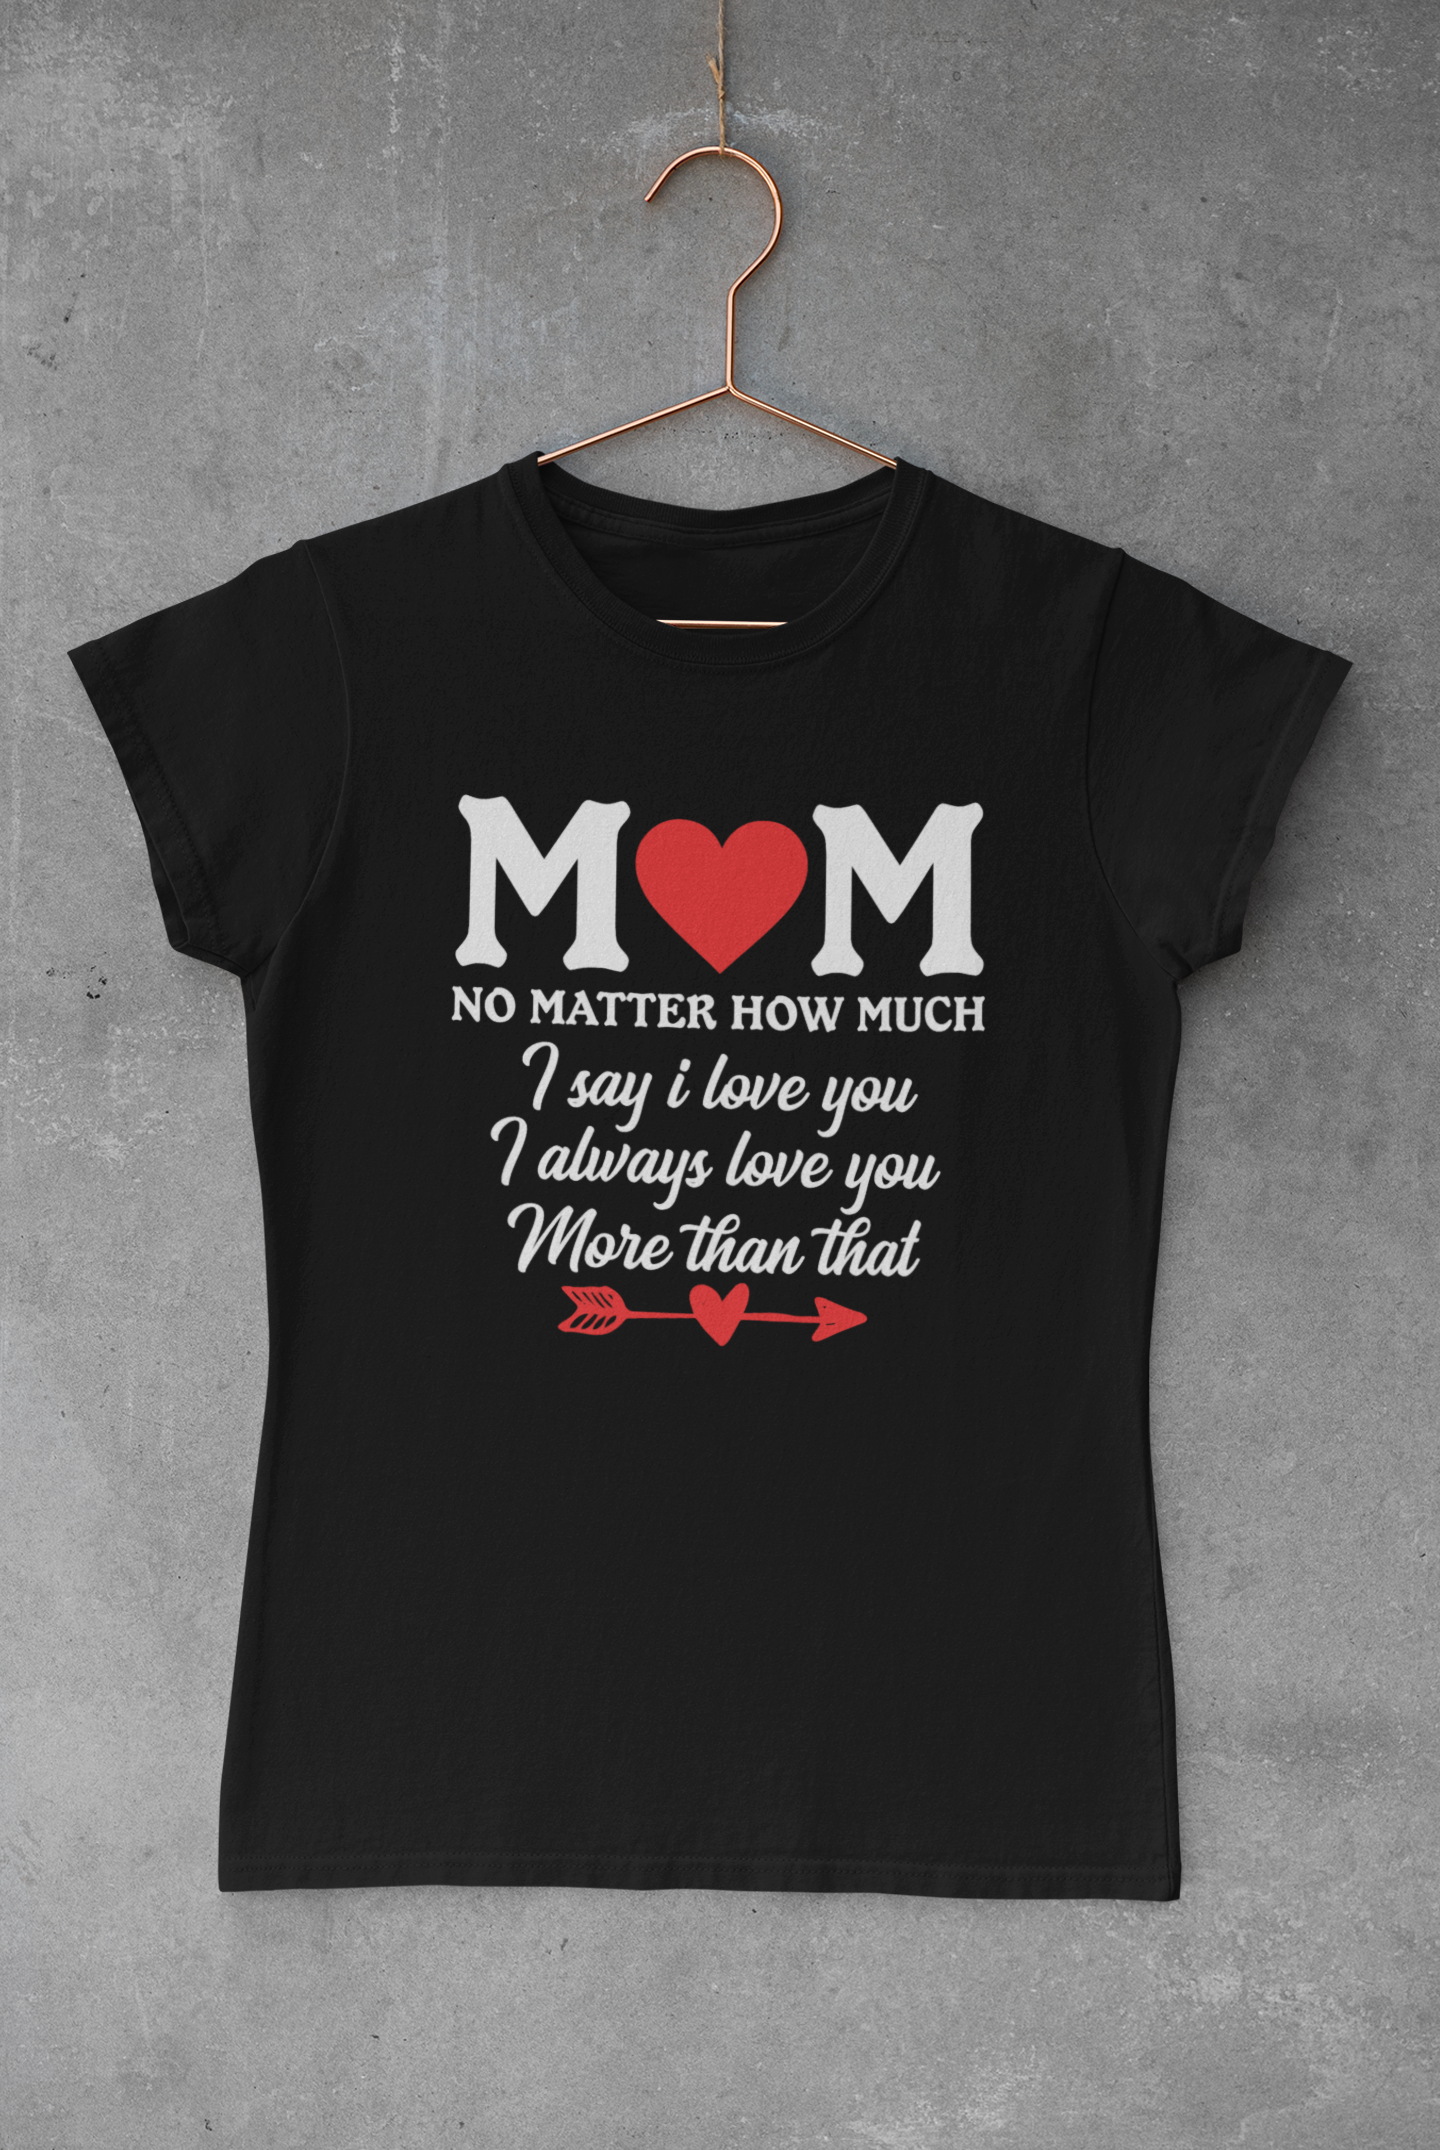 Mom No Mater How Much T-shirt